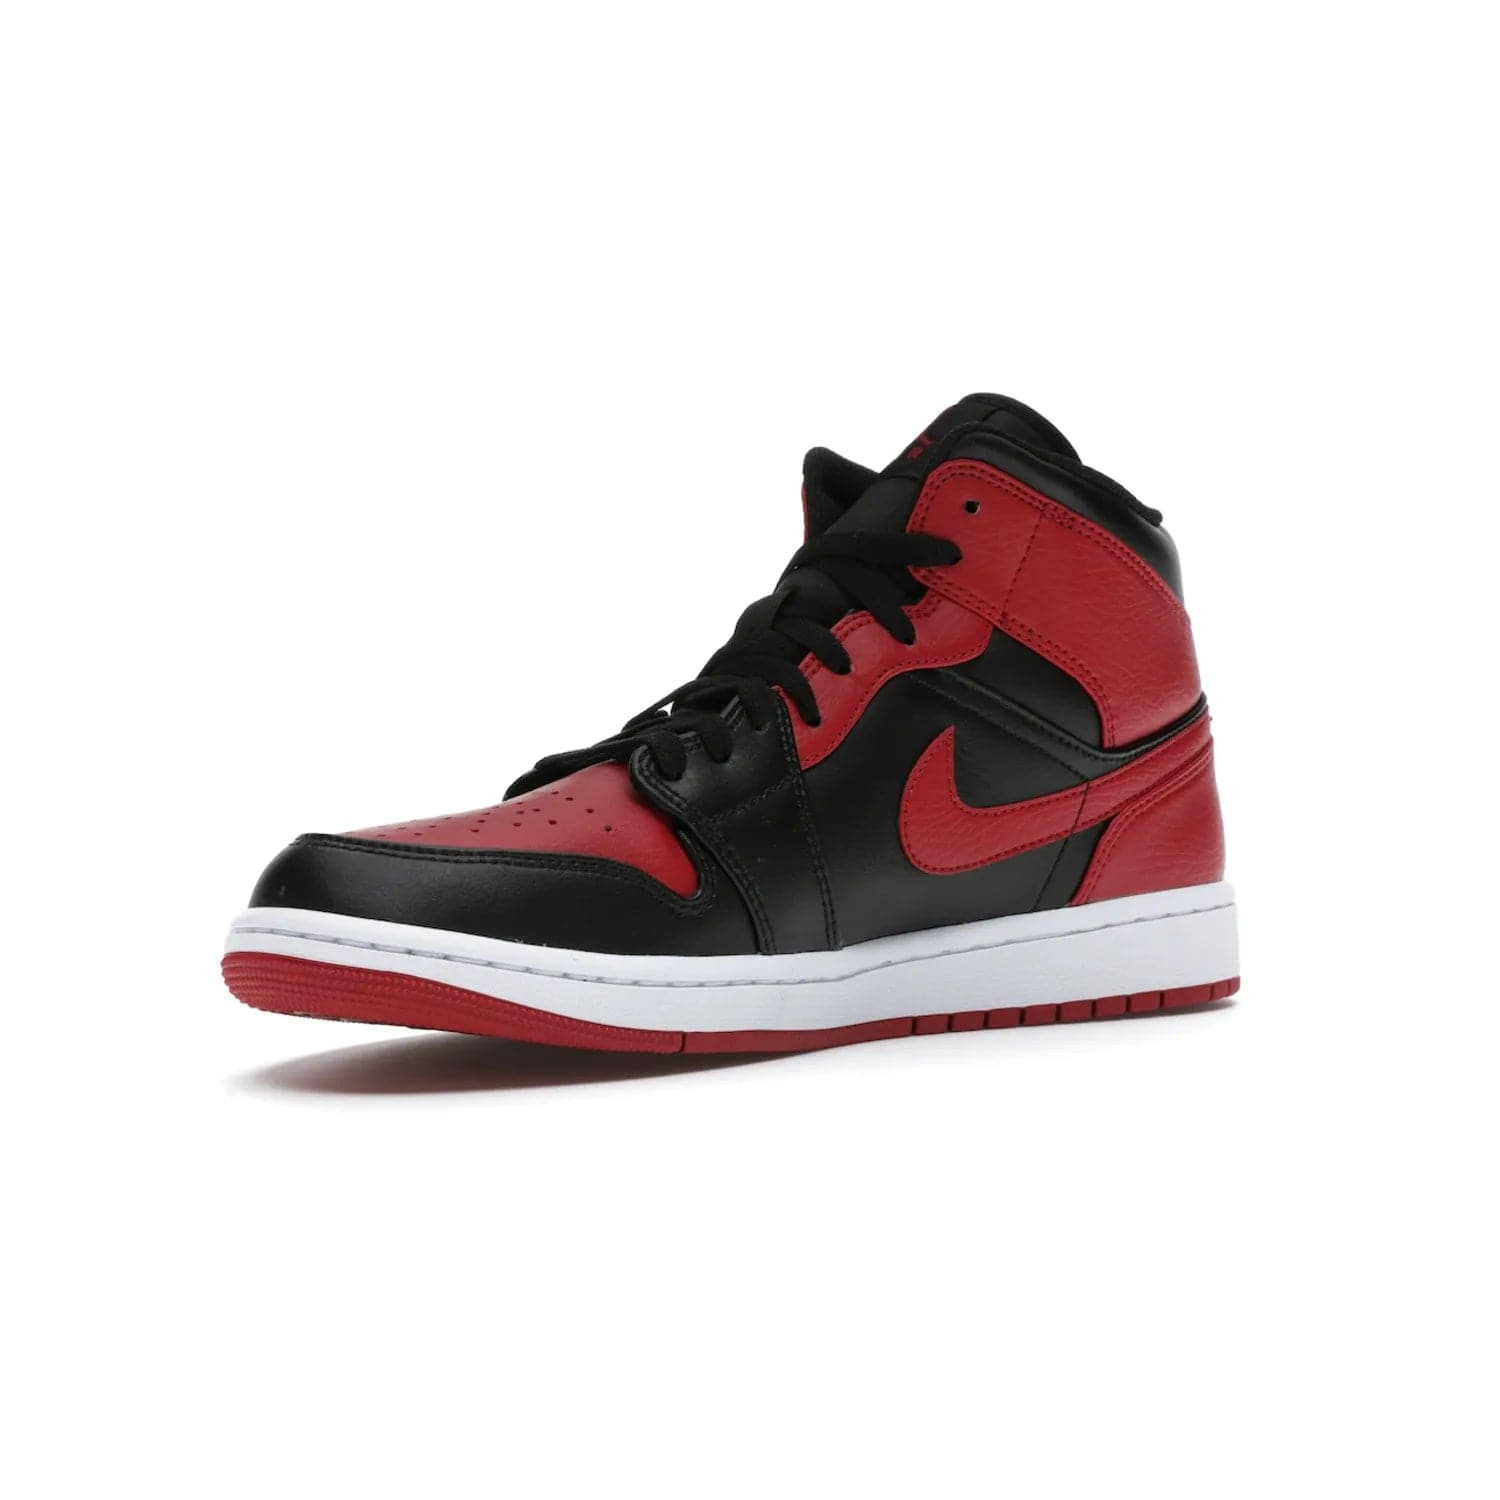 Jordan 1 Mid Banned (2020) - Image 15 - Only at www.BallersClubKickz.com - The Air Jordan 1 Mid Banned (2020) brings a modern twist to the classic Banned colorway. Features full-grain black and red leather uppers, red leather around the toe, collar, heel, & Swoosh. Release November 2021 for $110.